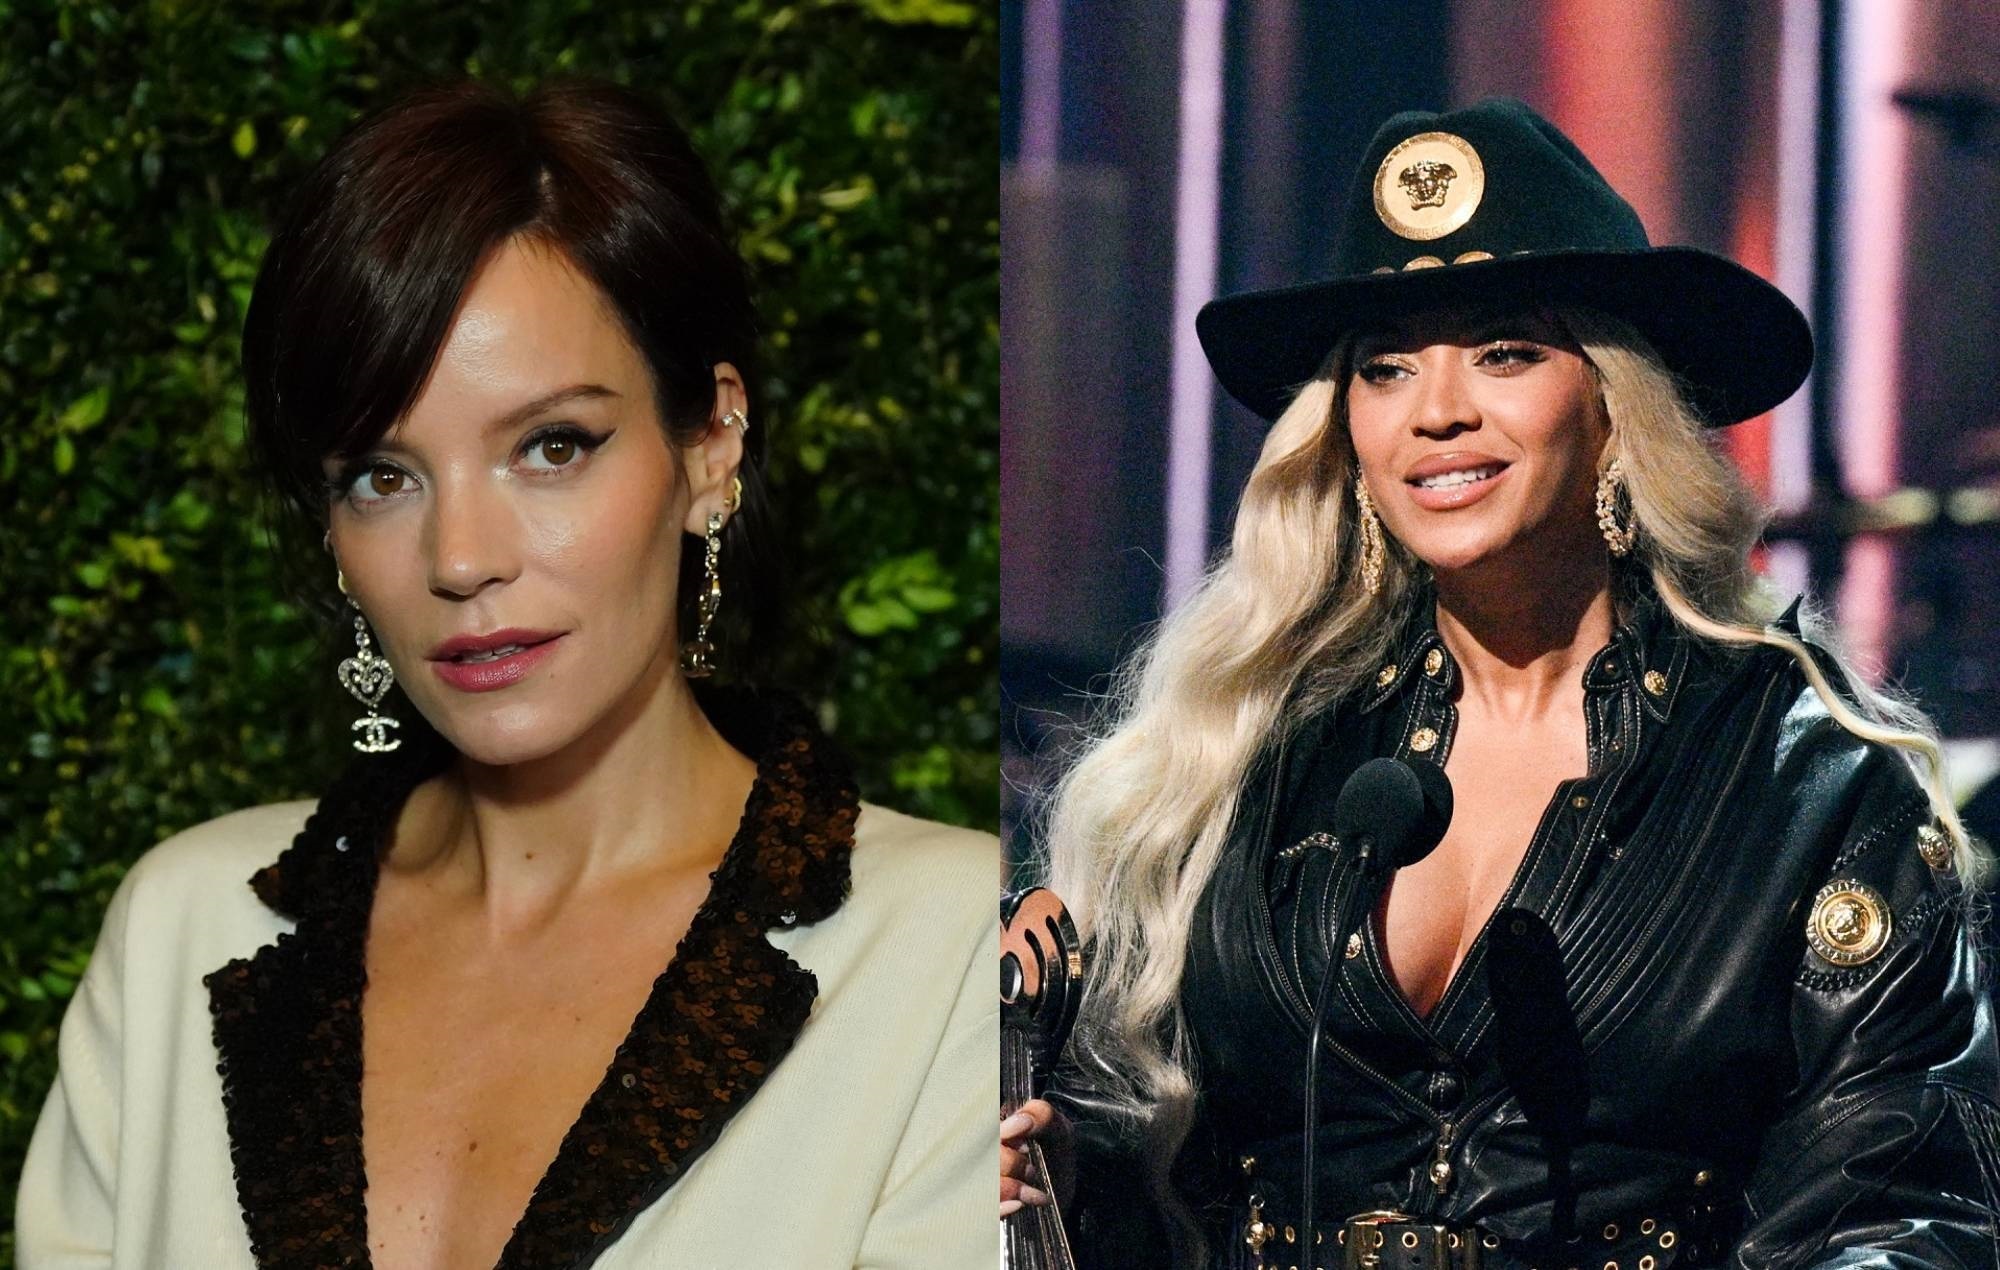 Lily Allen shares thoughts on Beyoncé’s “weird” cover of ‘Jolene’